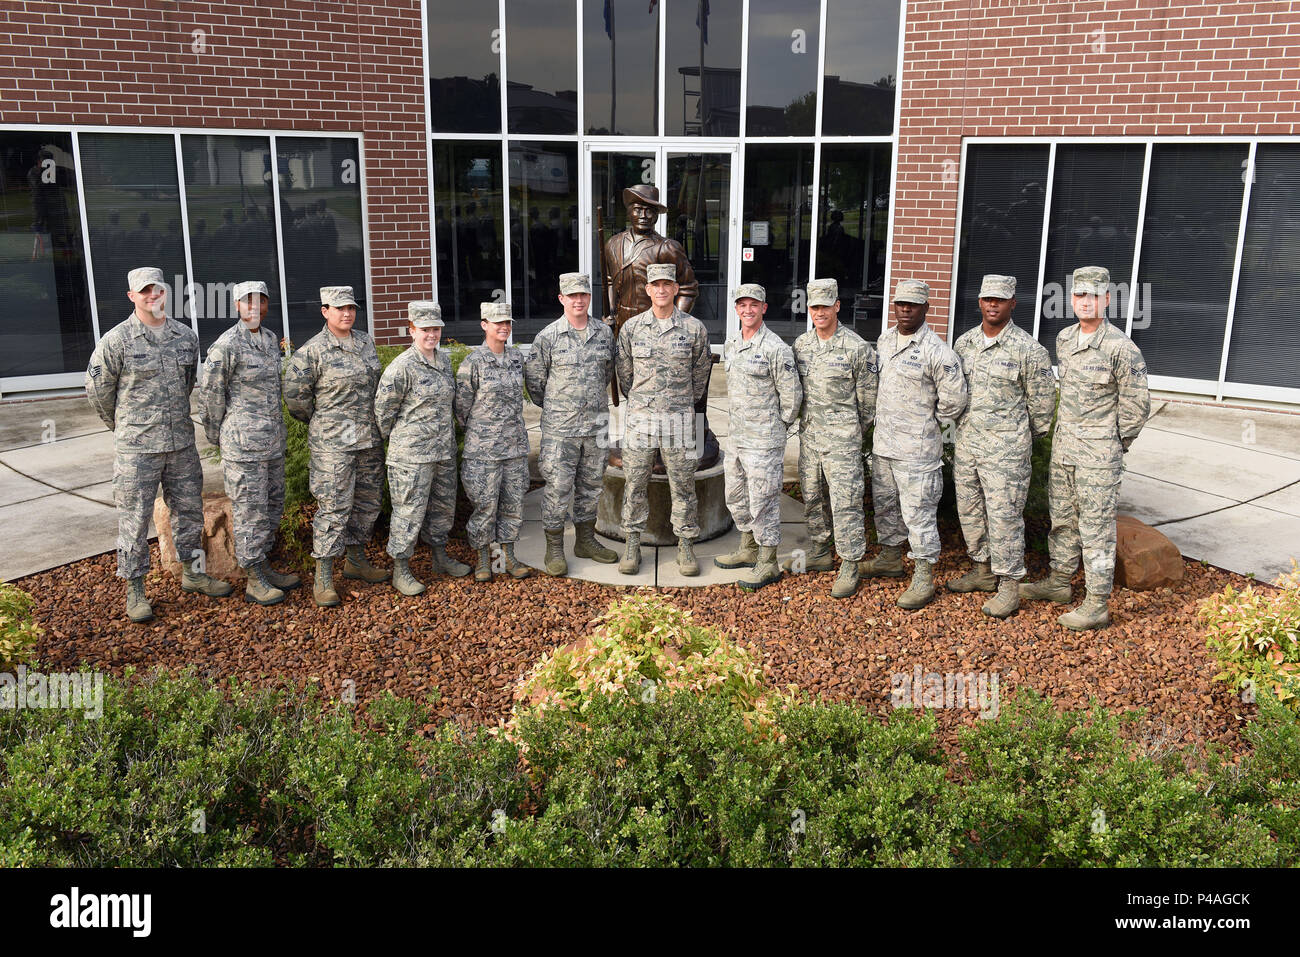 Airman leadership school nominees for the Chief Master Sergeant Paul H. Lankford Enlisted Professional Military Education Center leadership award take a group photo with Chief Master Sgt. Edward L. Walden Sr., commandant, outside his office June 24, 2016, at the I.G. Brown Training and Education Center on McGhee Tyson Air National Guard Base in Louisville, Tenn. (U.S. Air National Guard photo by Master Sgt. Mike R. Smith/Released) Stock Photo